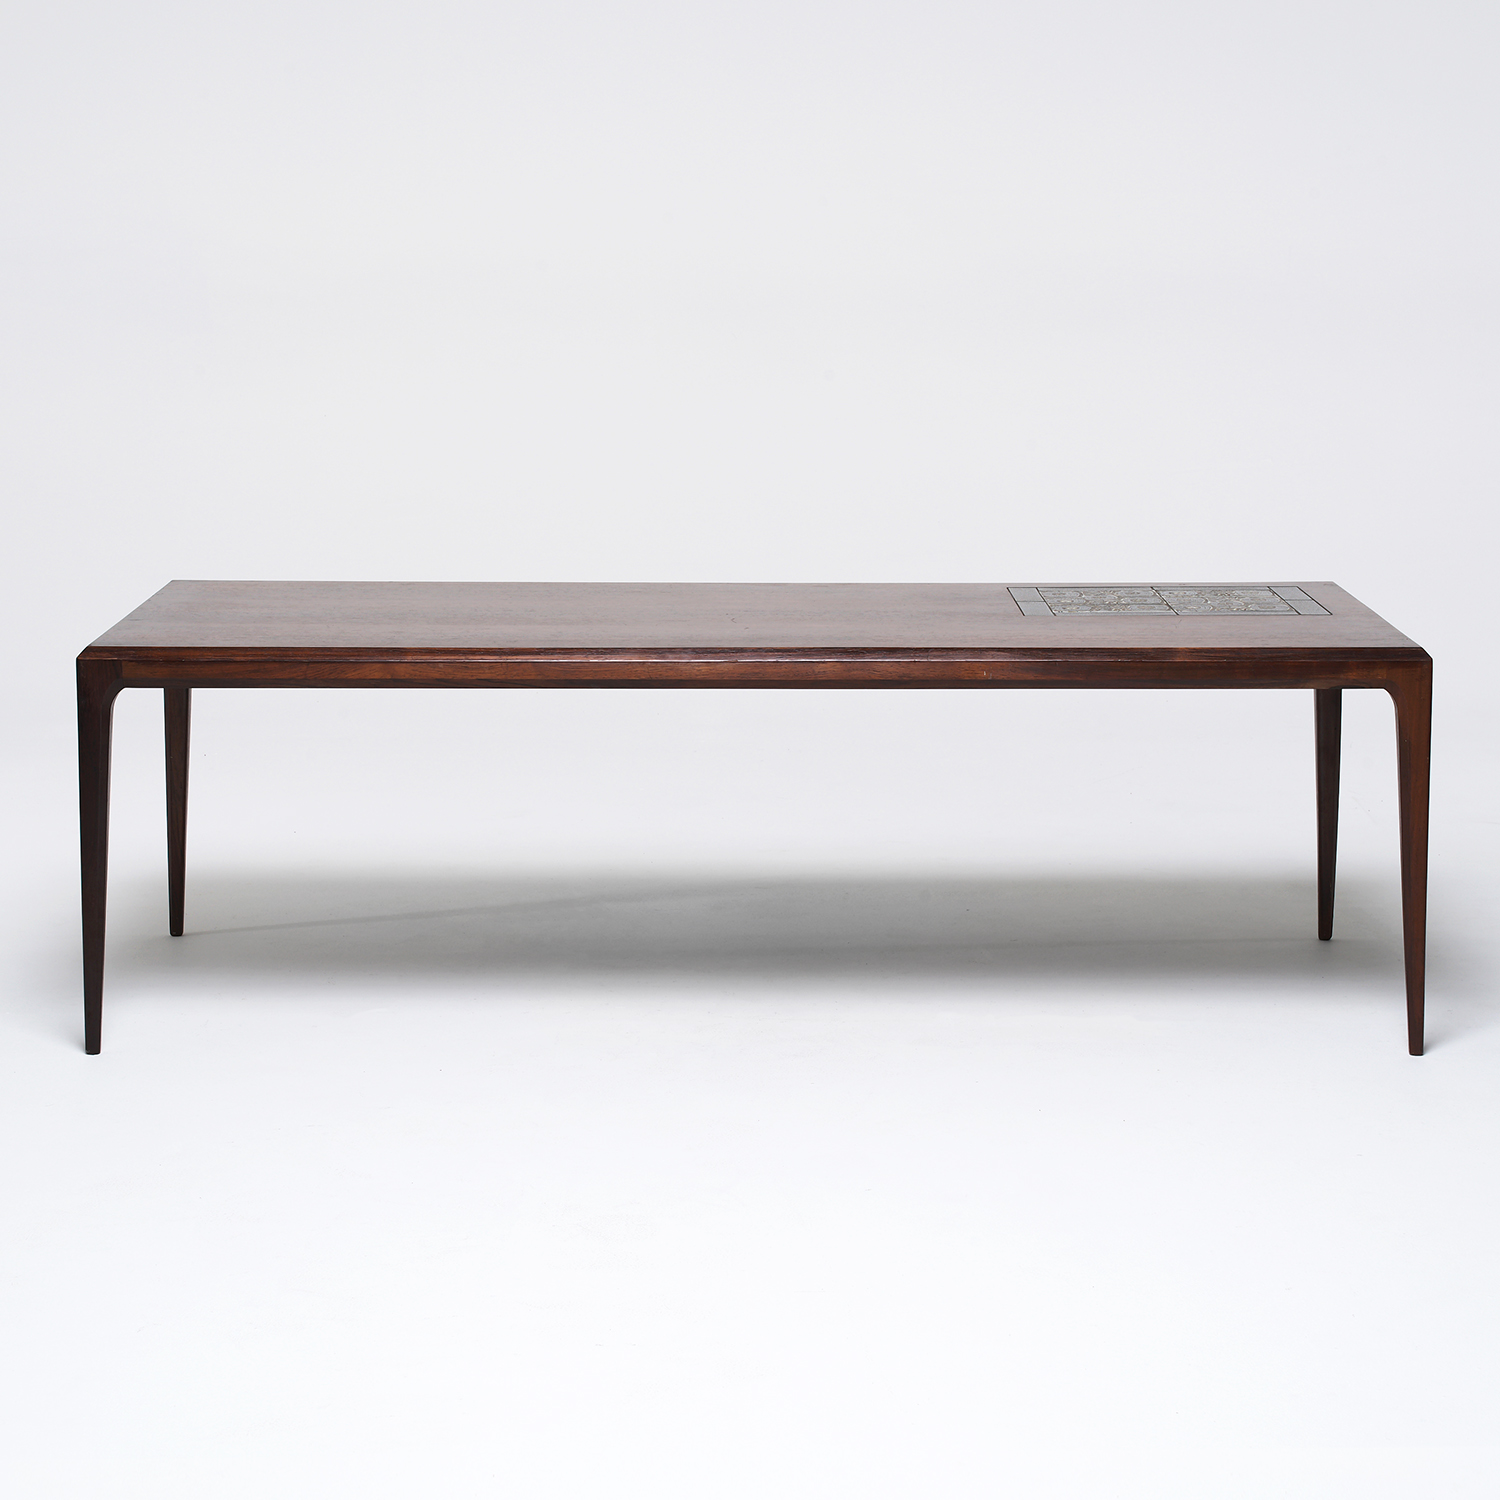 20th Century Danish Rosewood Coffee Table by Severin Hansen & Nils Thorsson